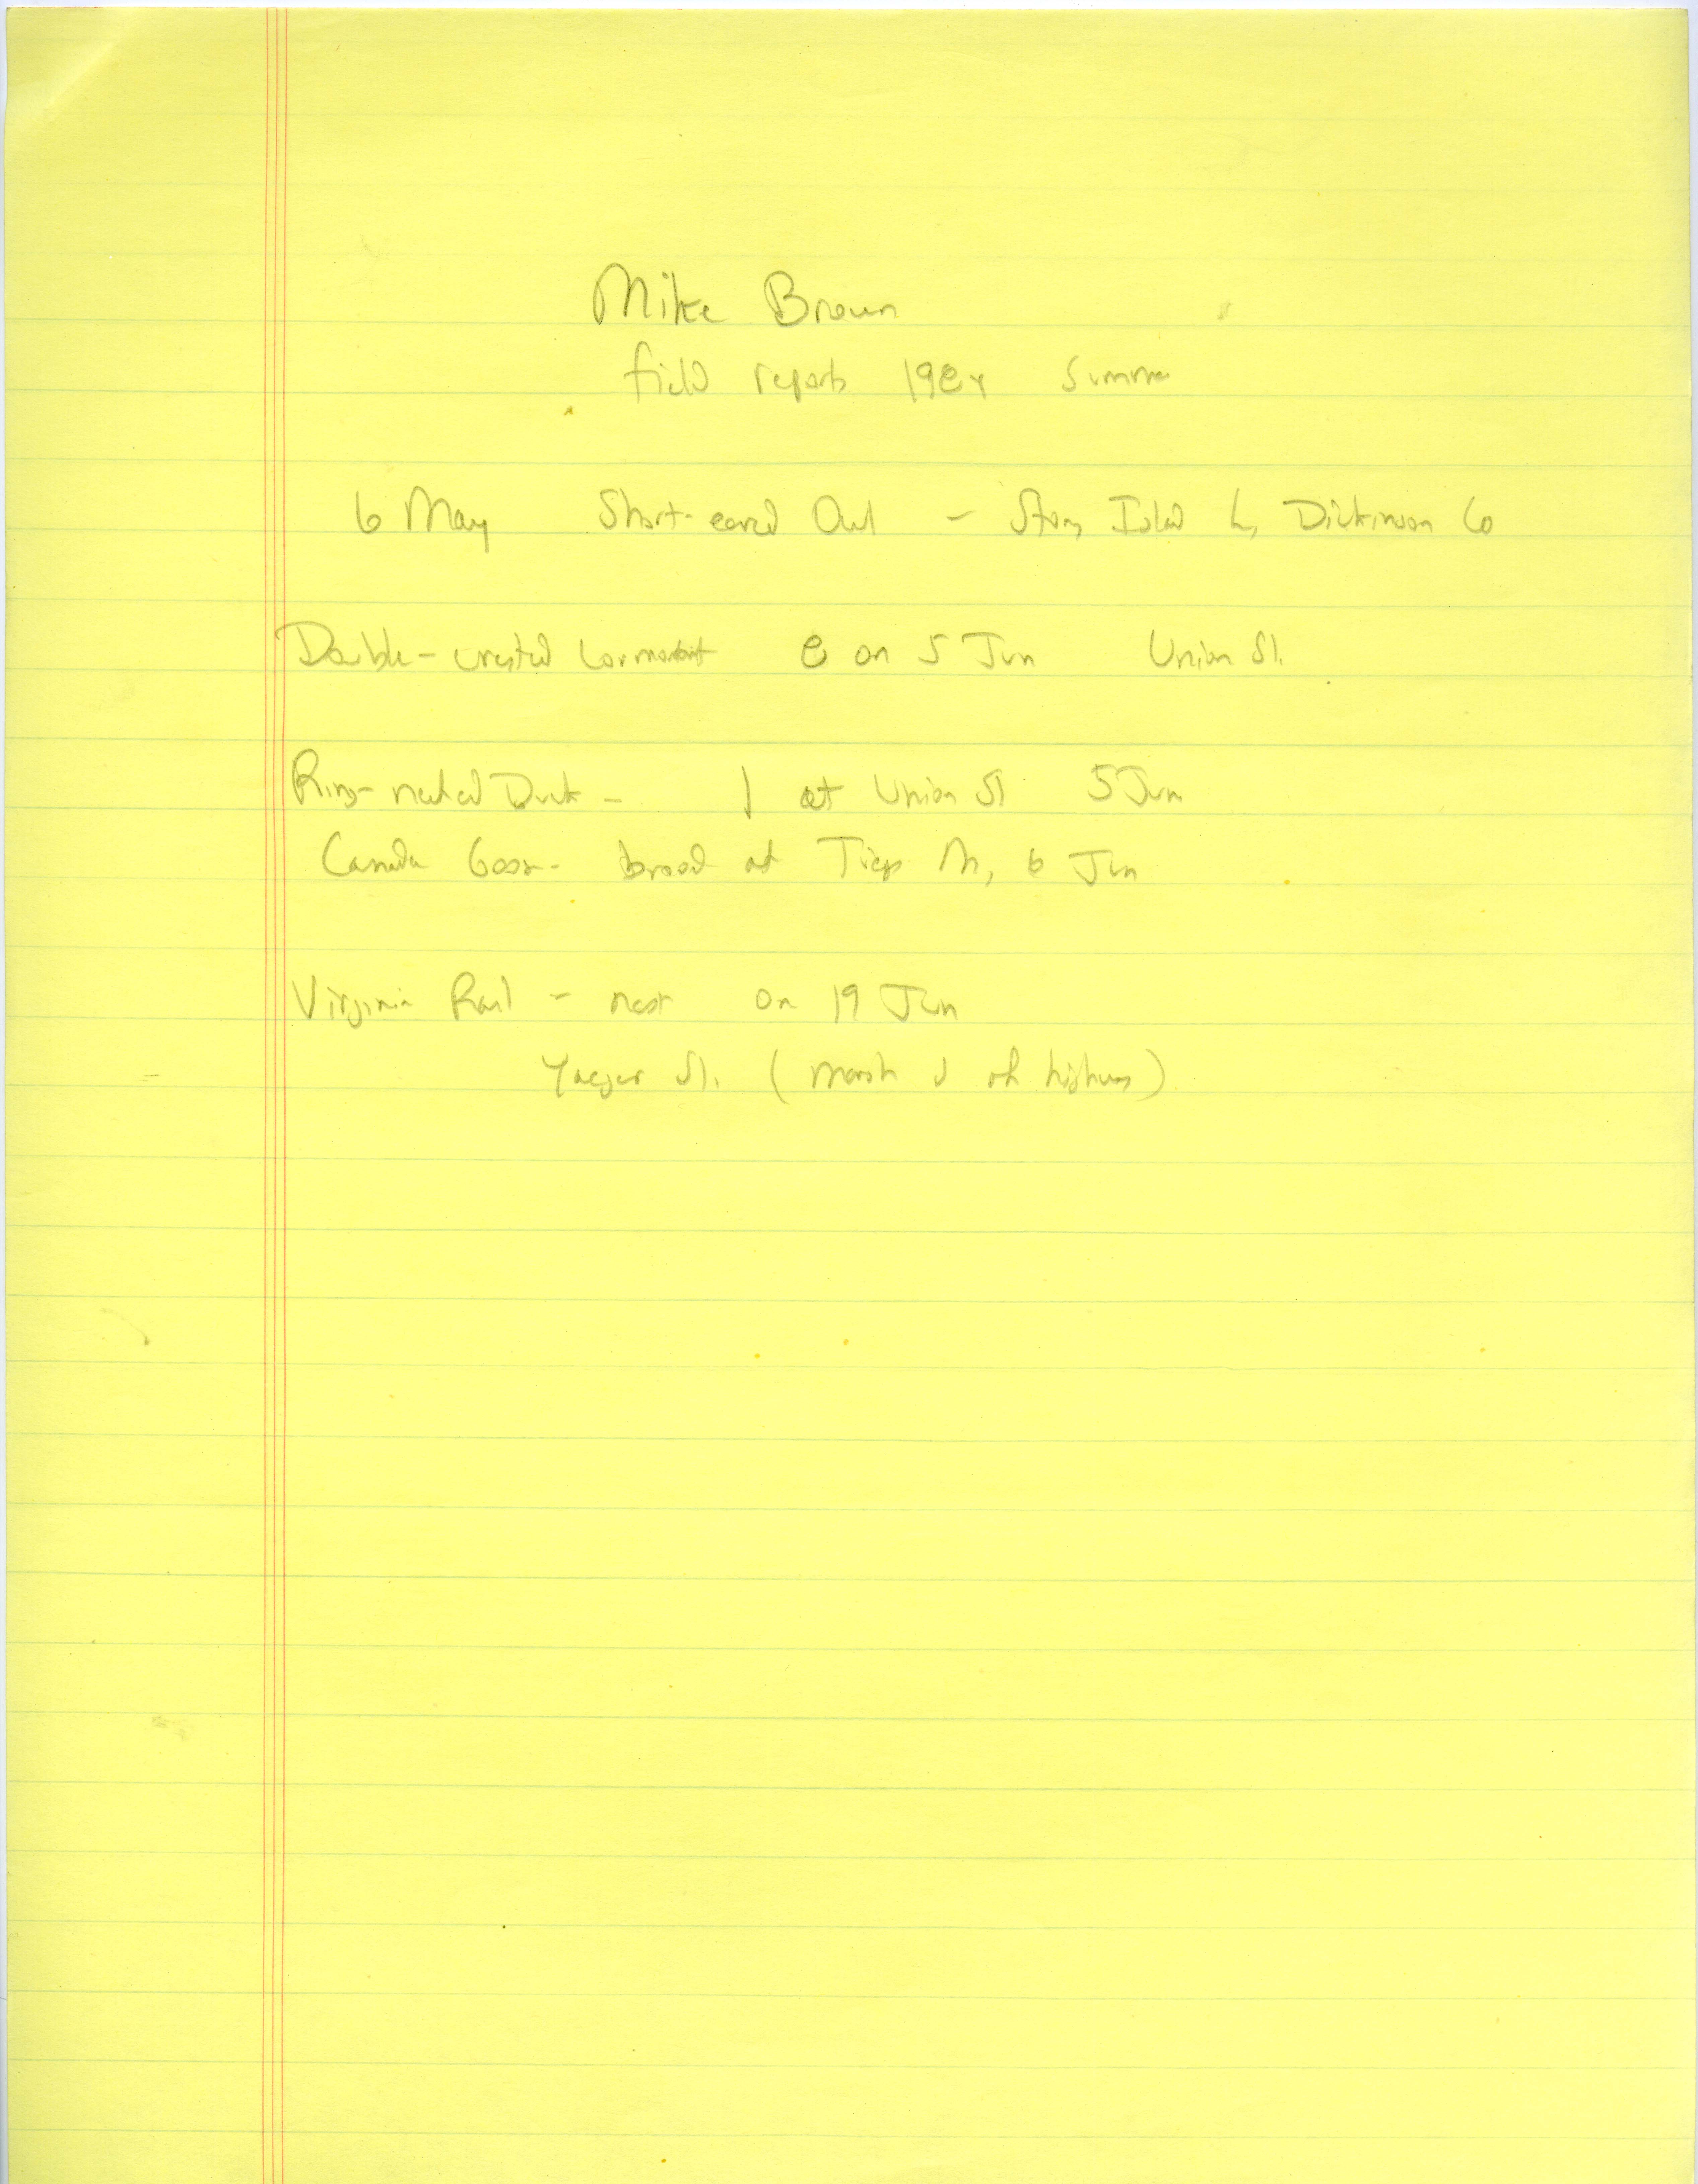 Field notes contributed by Mike Brown, summer 1984